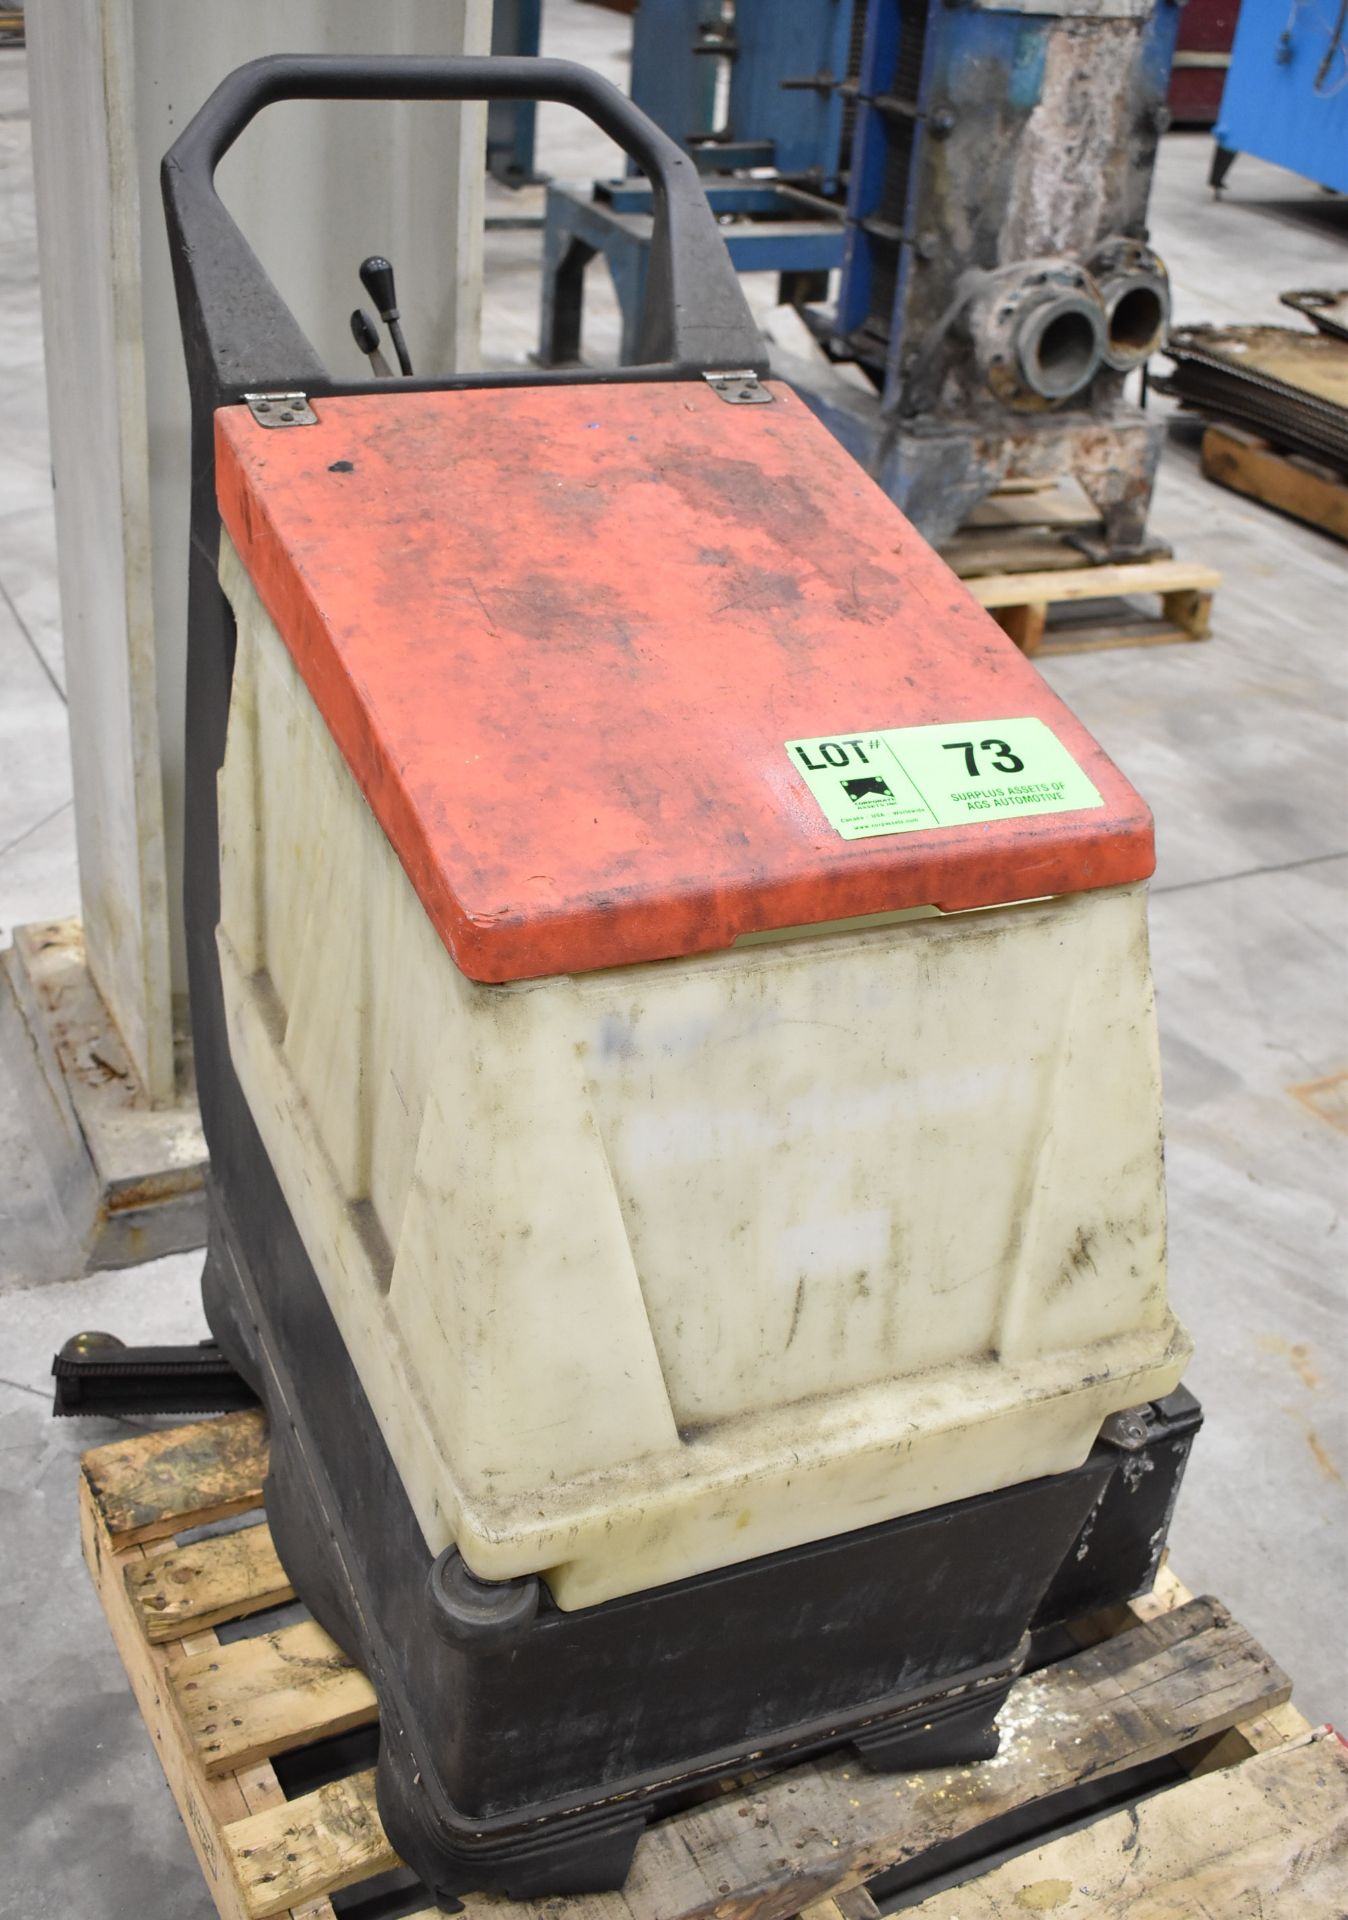 MFG. UNKNOWN ELECTRIC WALK-BEHIND FLOOR SCRUBBER, S/N: N/A (NOT IN SERVICE - NO BATTERY)